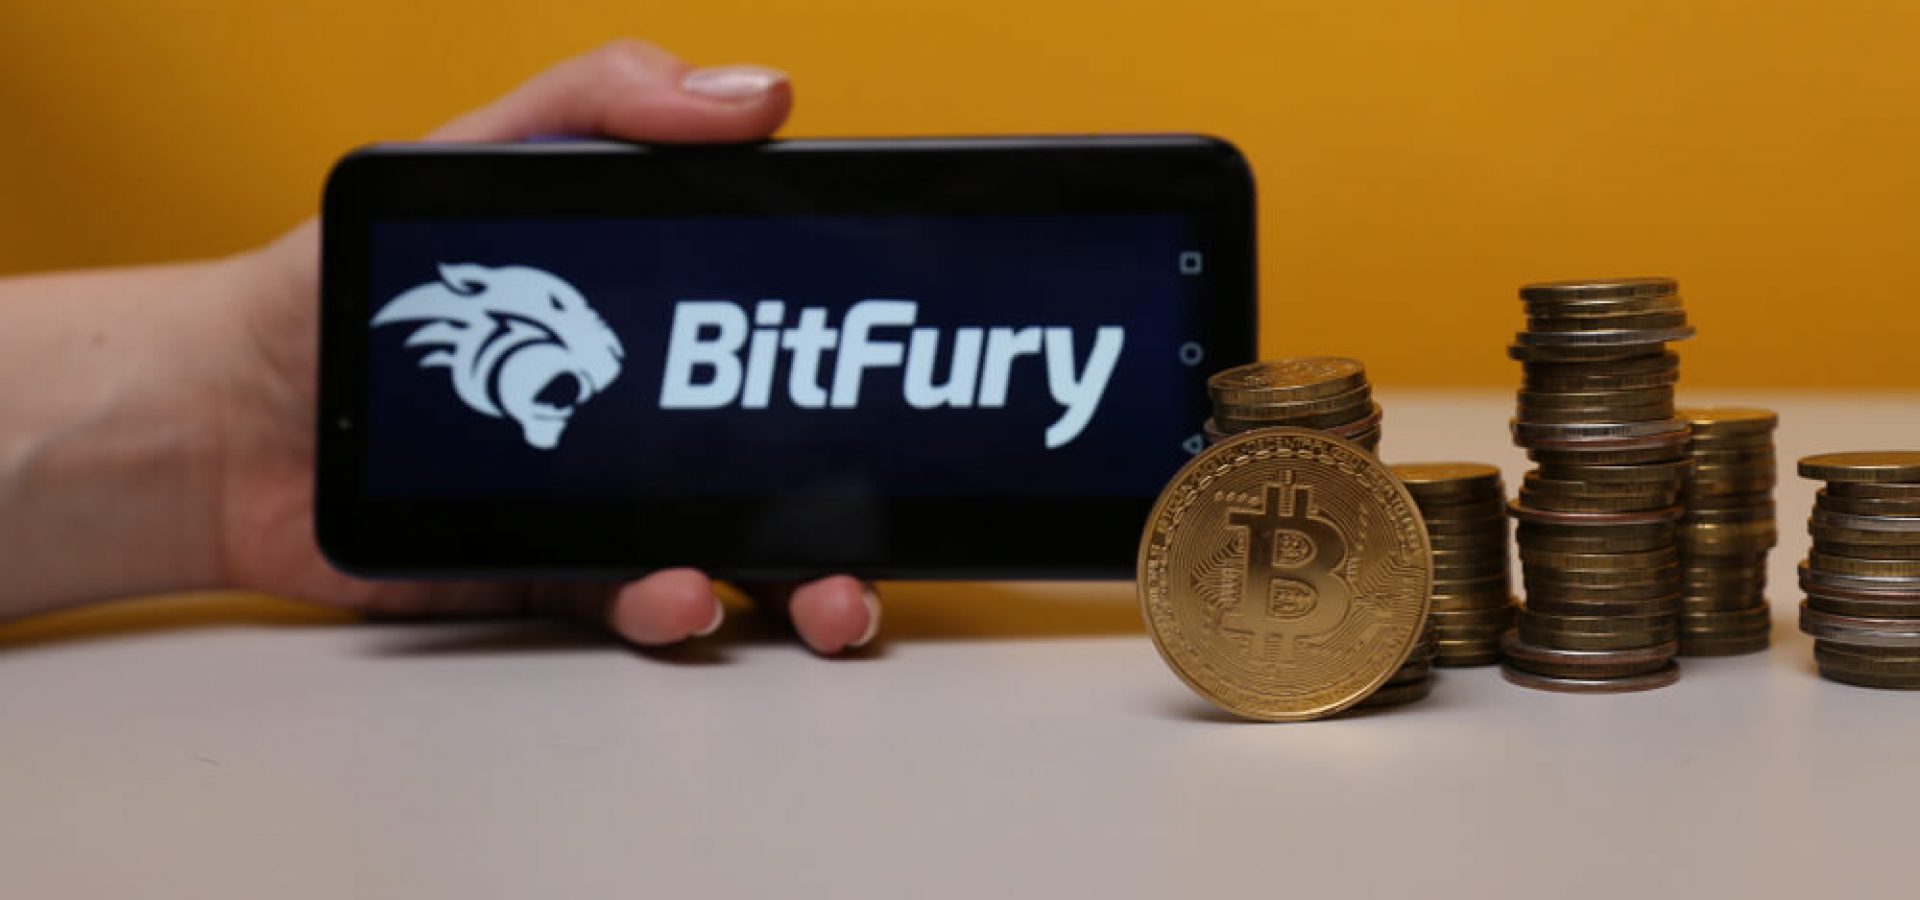 Block Chain: The Bitfury Group sign on phone display.